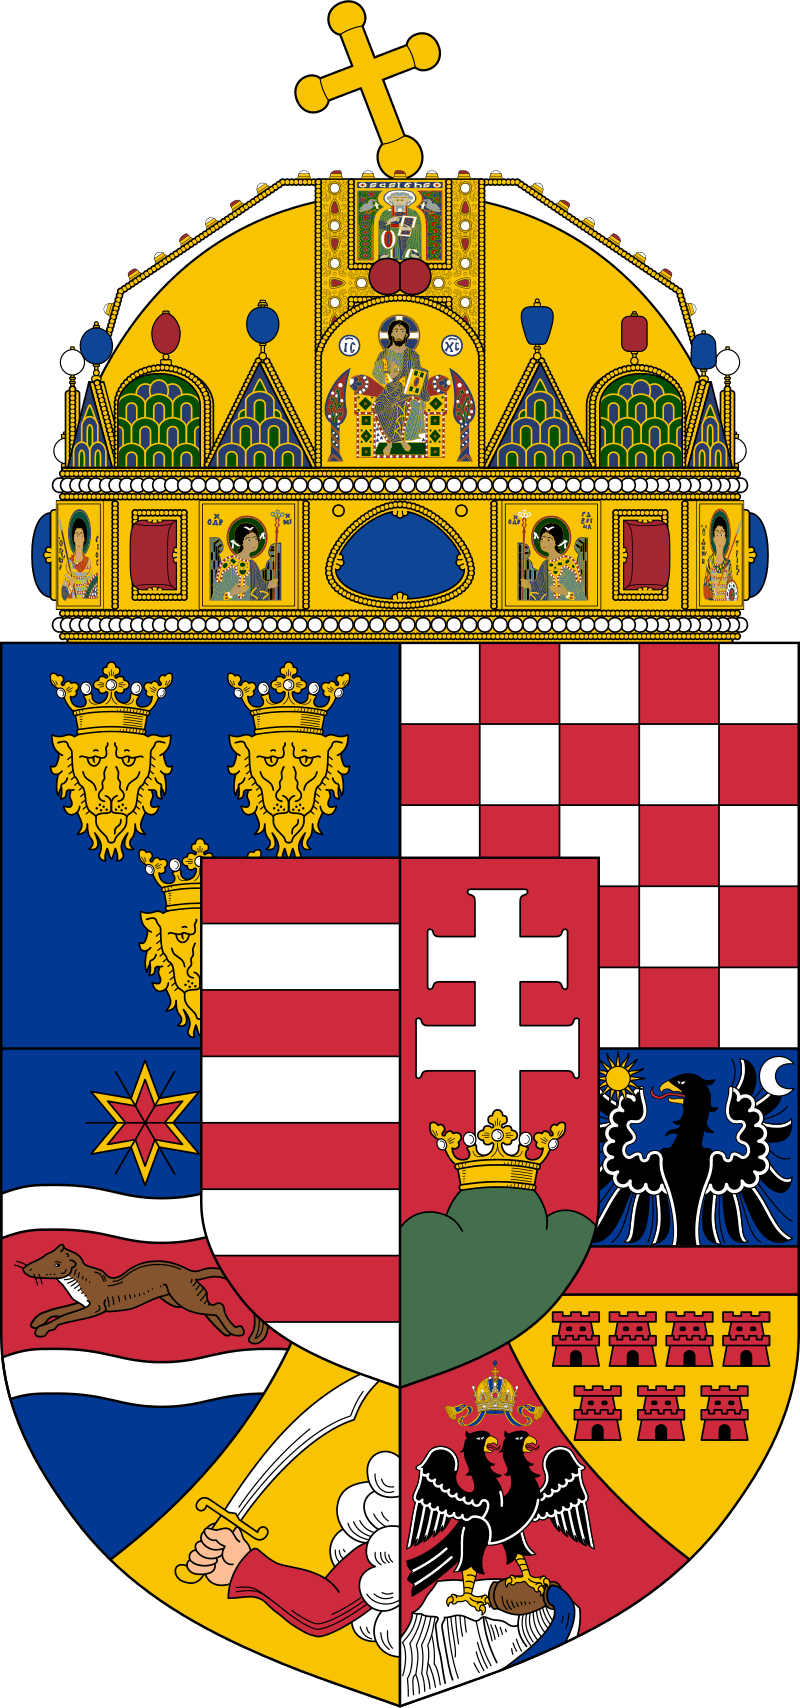 800px-Coat_of_arms_of_the_Lands_of_the_Holy_Hungarian_Crown_(1915-1918,_1919-1946).svg-min.png